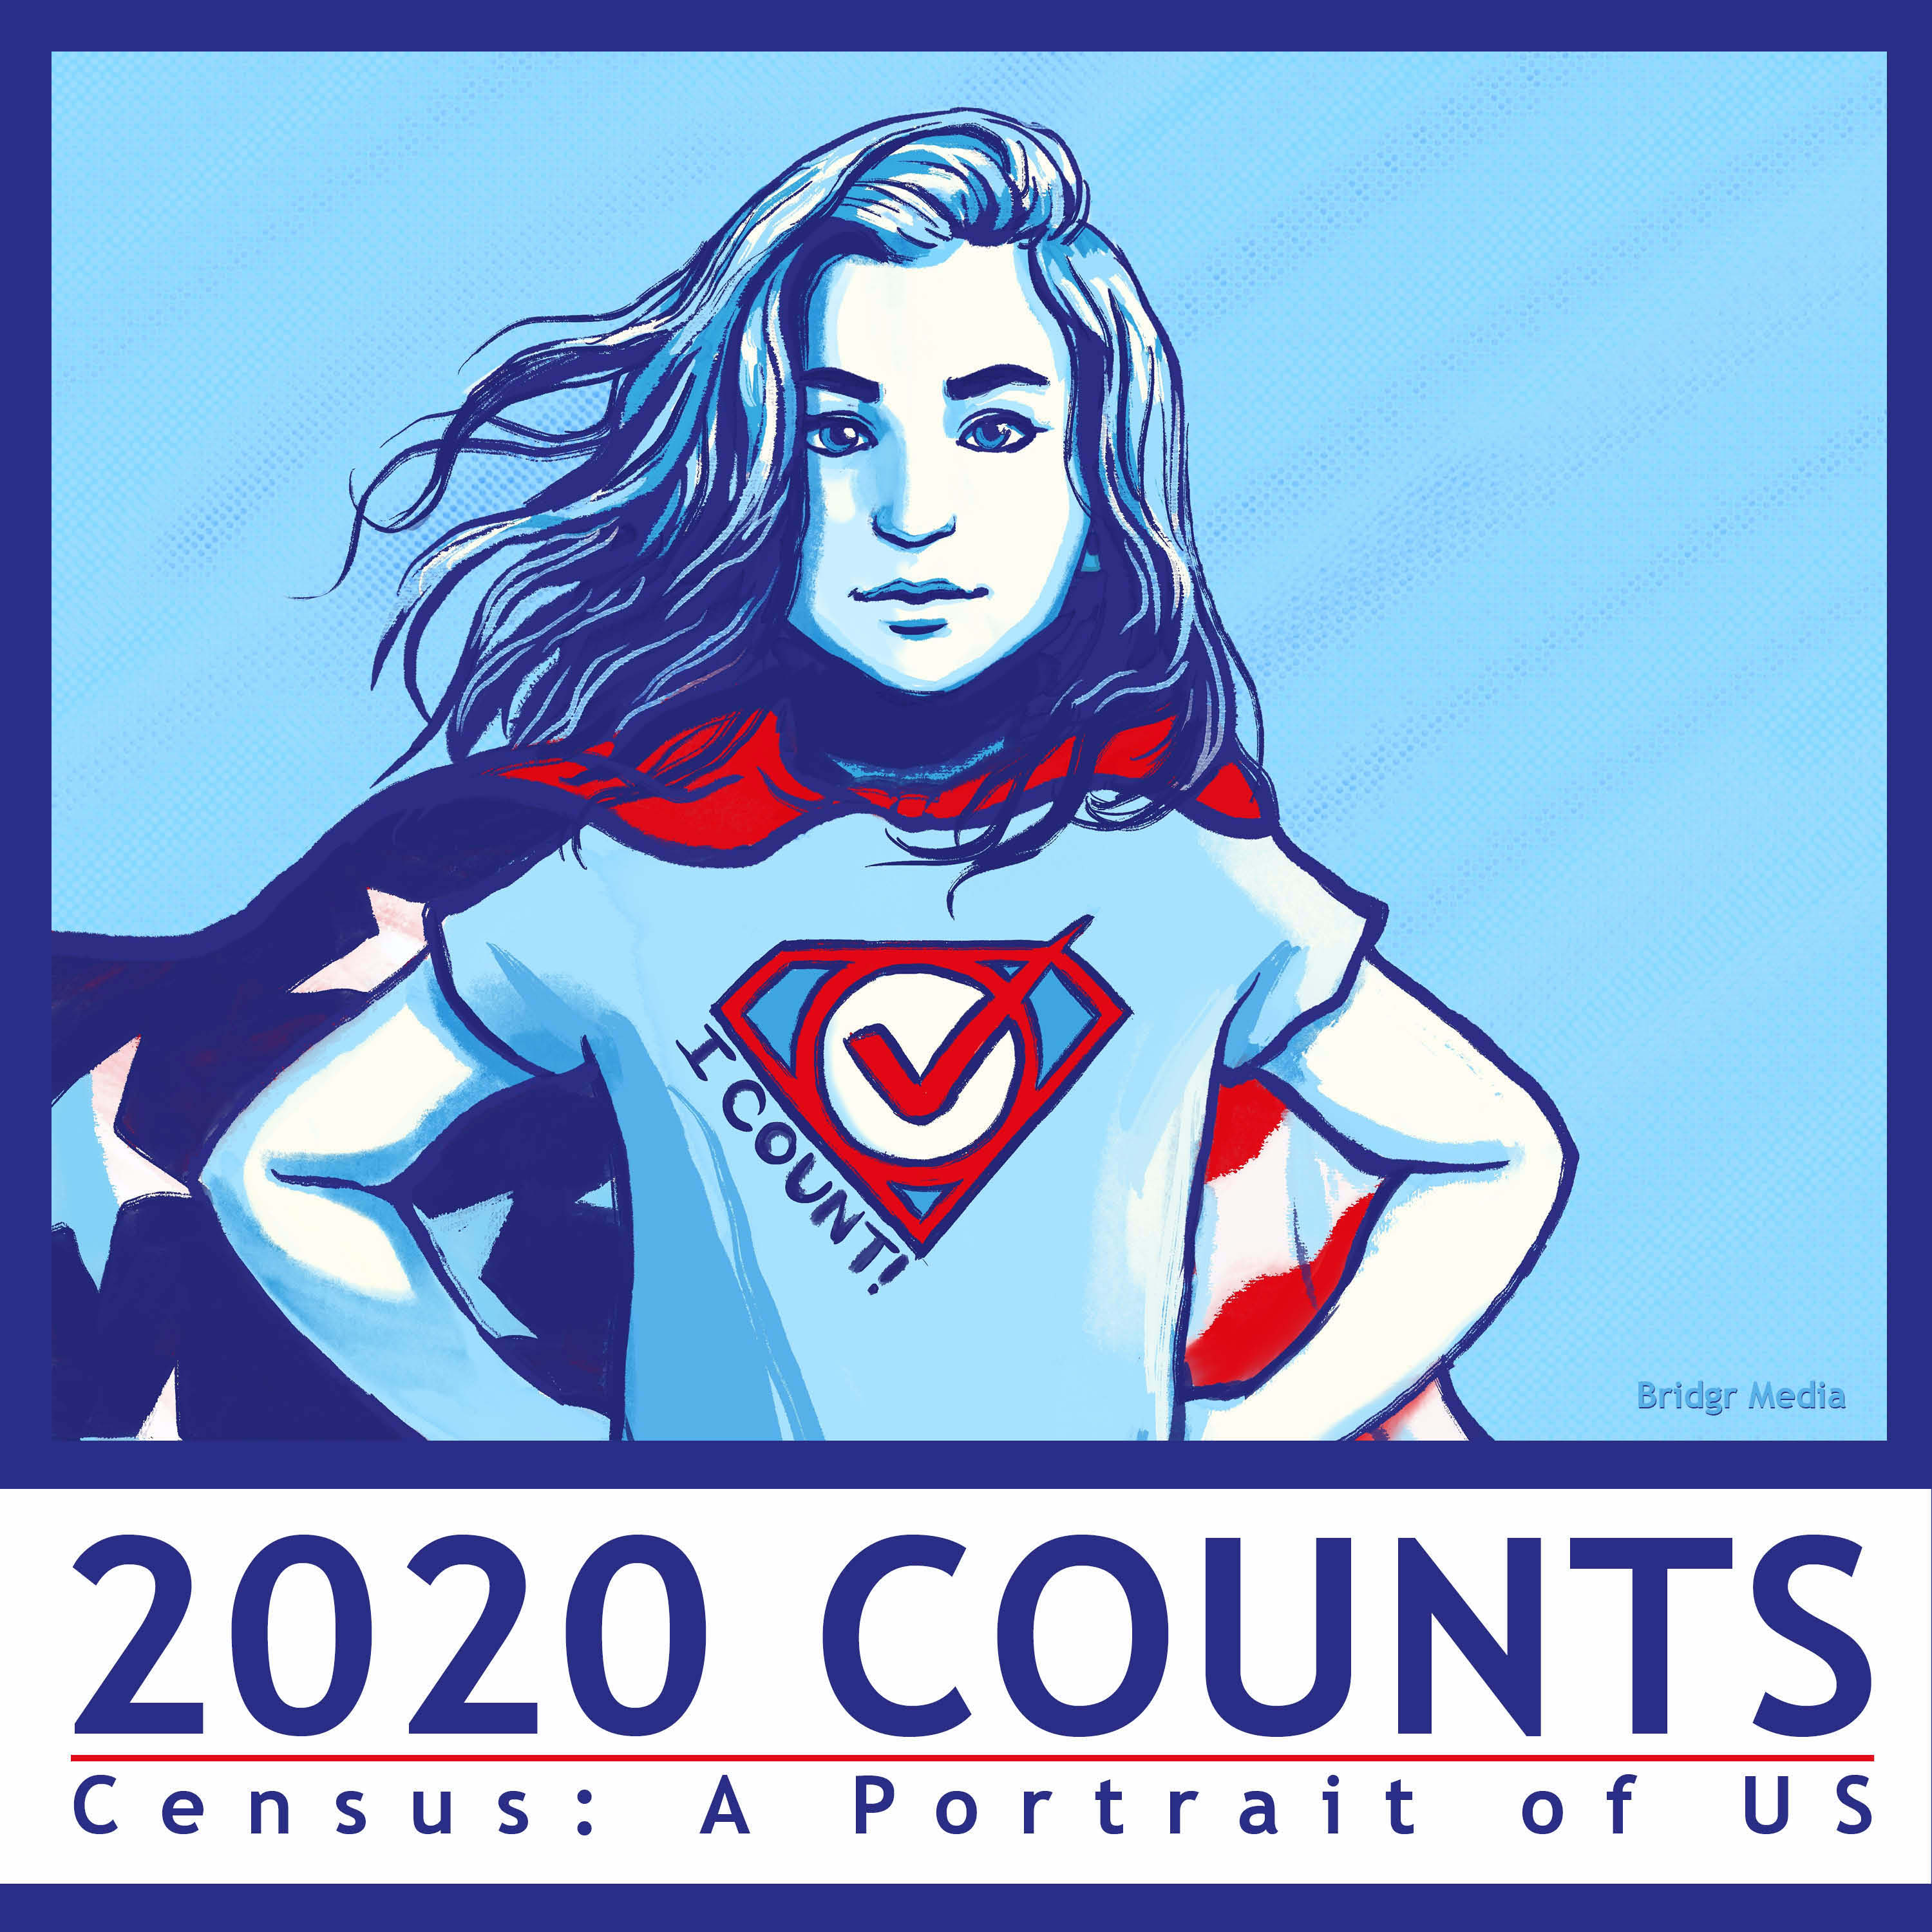 Artwork for 2020 Counts